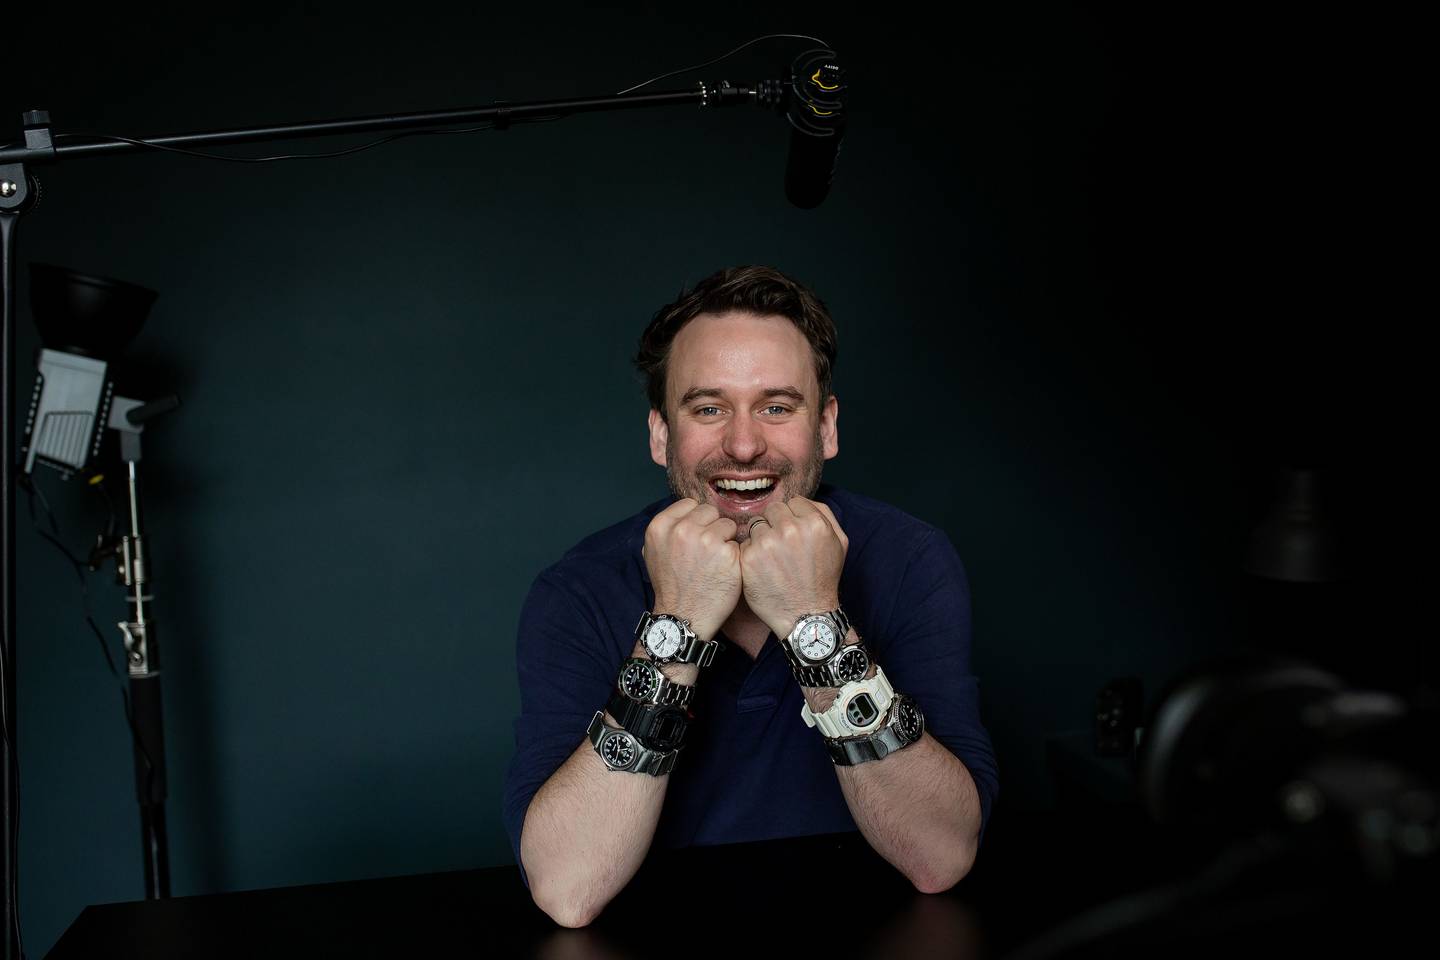 Adrian Barker, founder of Bark & Jack website, poses with his collection of watches at his home studio near Glasgow, UK.